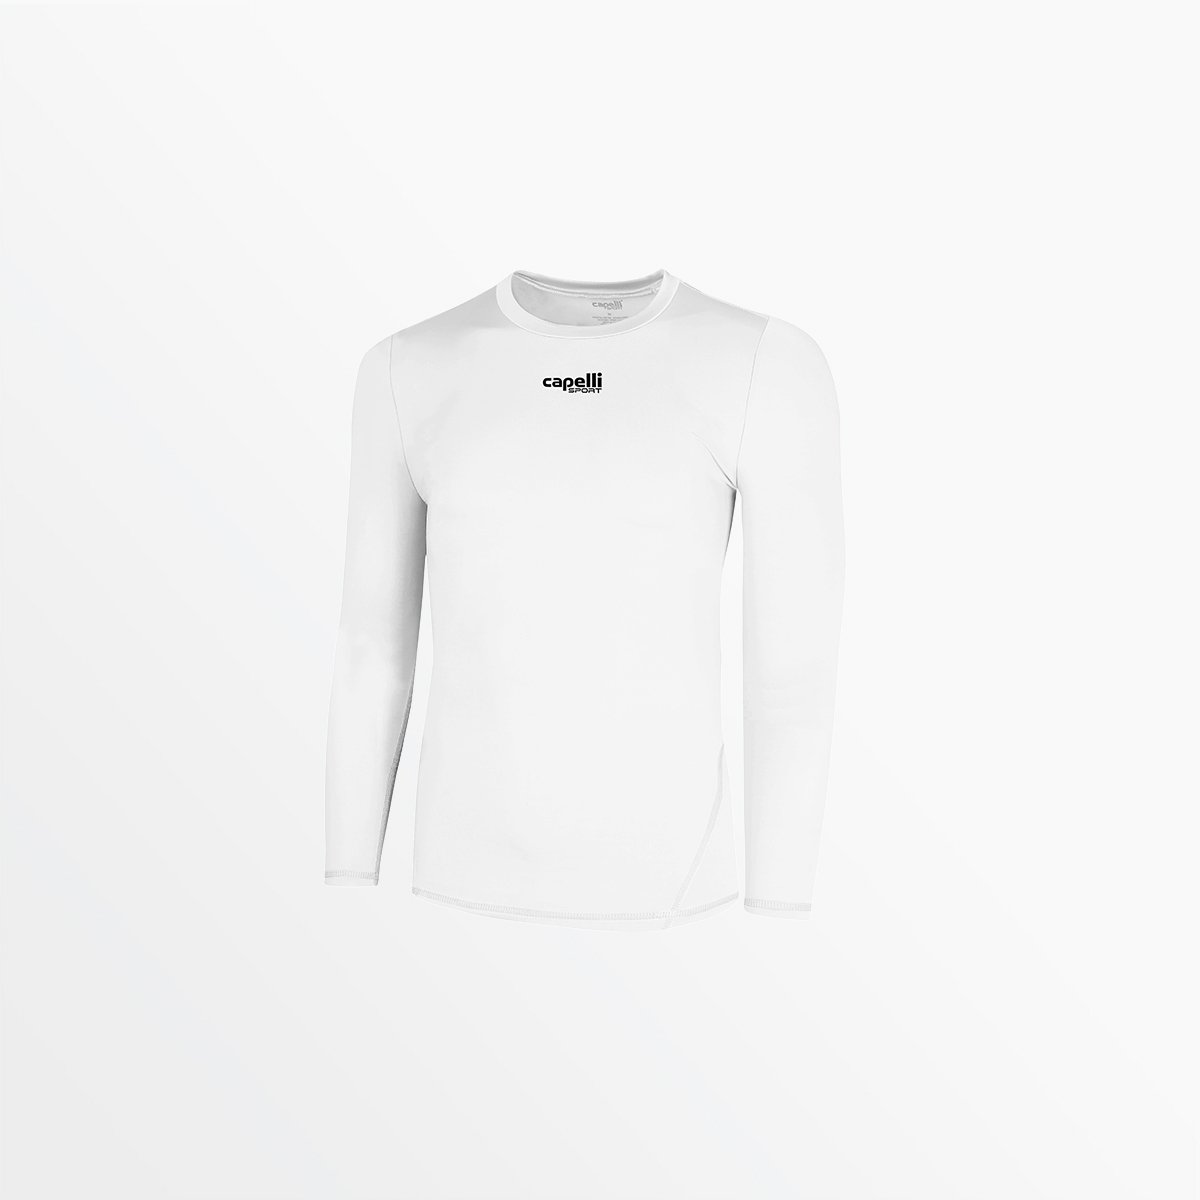 YOUTH LONG SLEEVE PERFORMANCE TOP